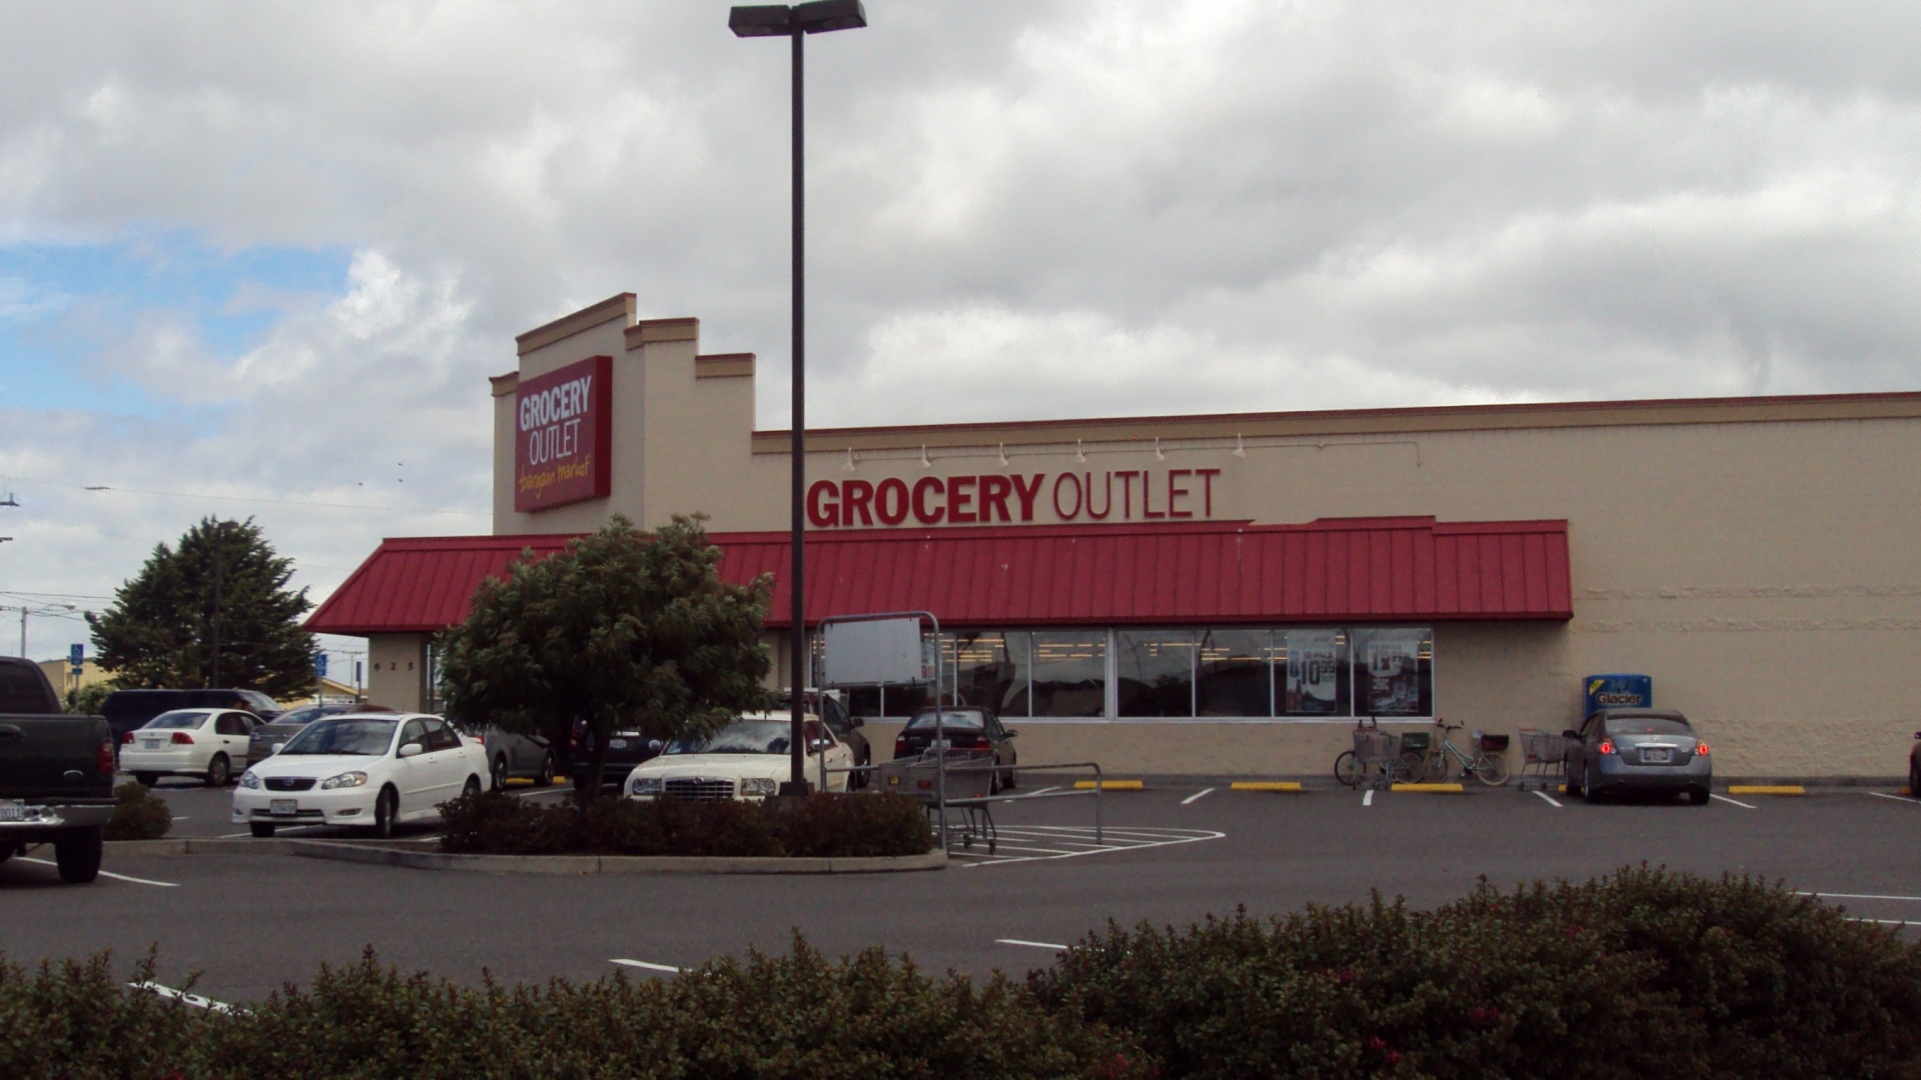 Eureka - Grocery Outlet - Read Investments | Real Estate Development & Management - California ...